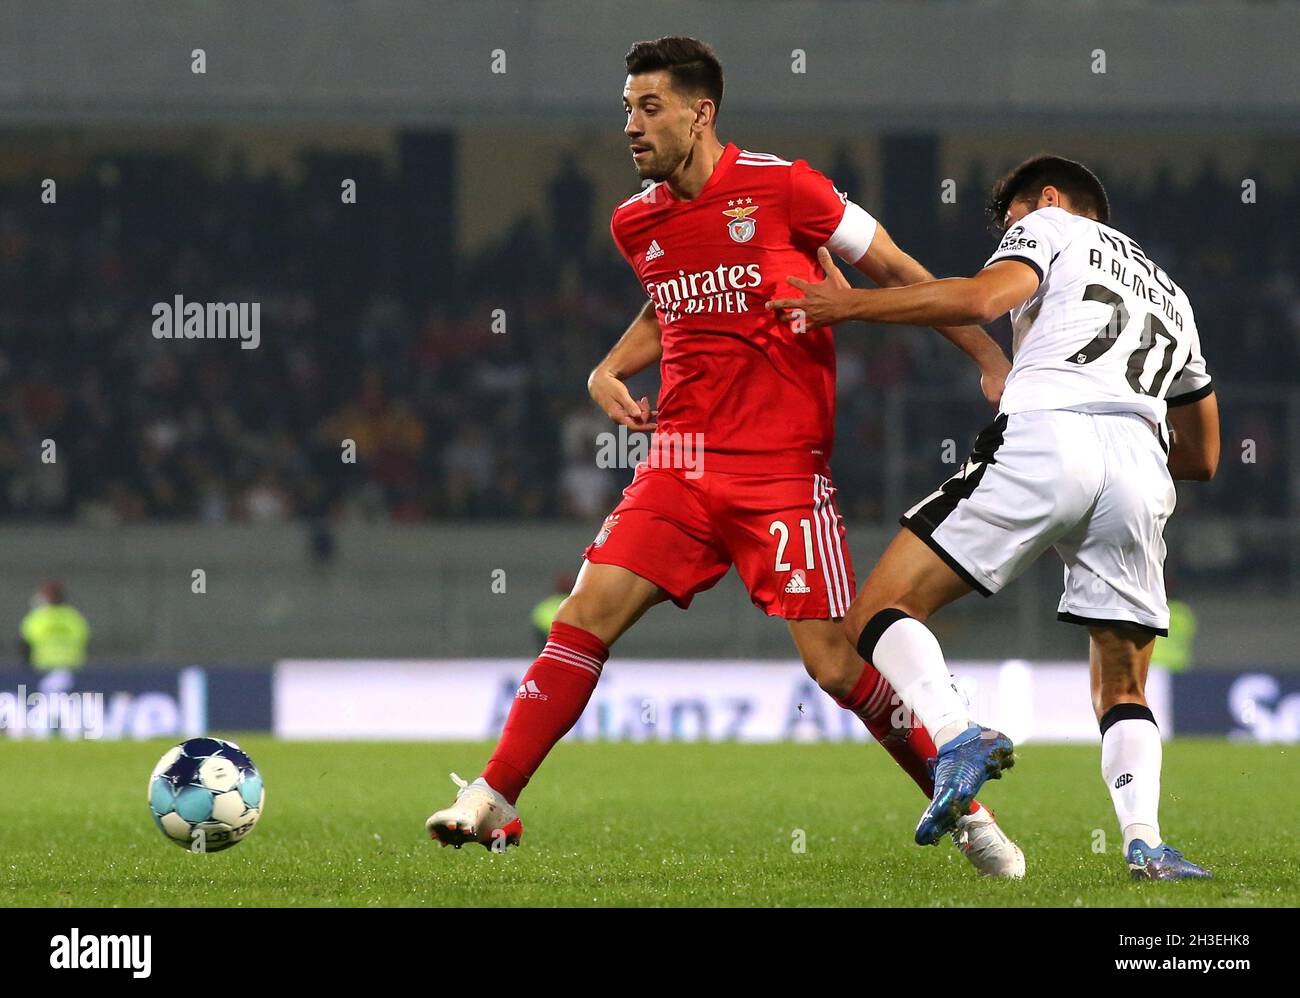 GUIMARAES, PORTUGAL - OCTOBER 27: Pizzi of Benfica SL competes for the ball with Andre Almeida of Vitoria SC ,during the Portugal Allianz Cup match between Vitoria SC and Benfica SL at Estadio Dom Afonso Henriques on October 27, 2021 in Guimaraes, Portugal. (Photo by MB Media) Stock Photo